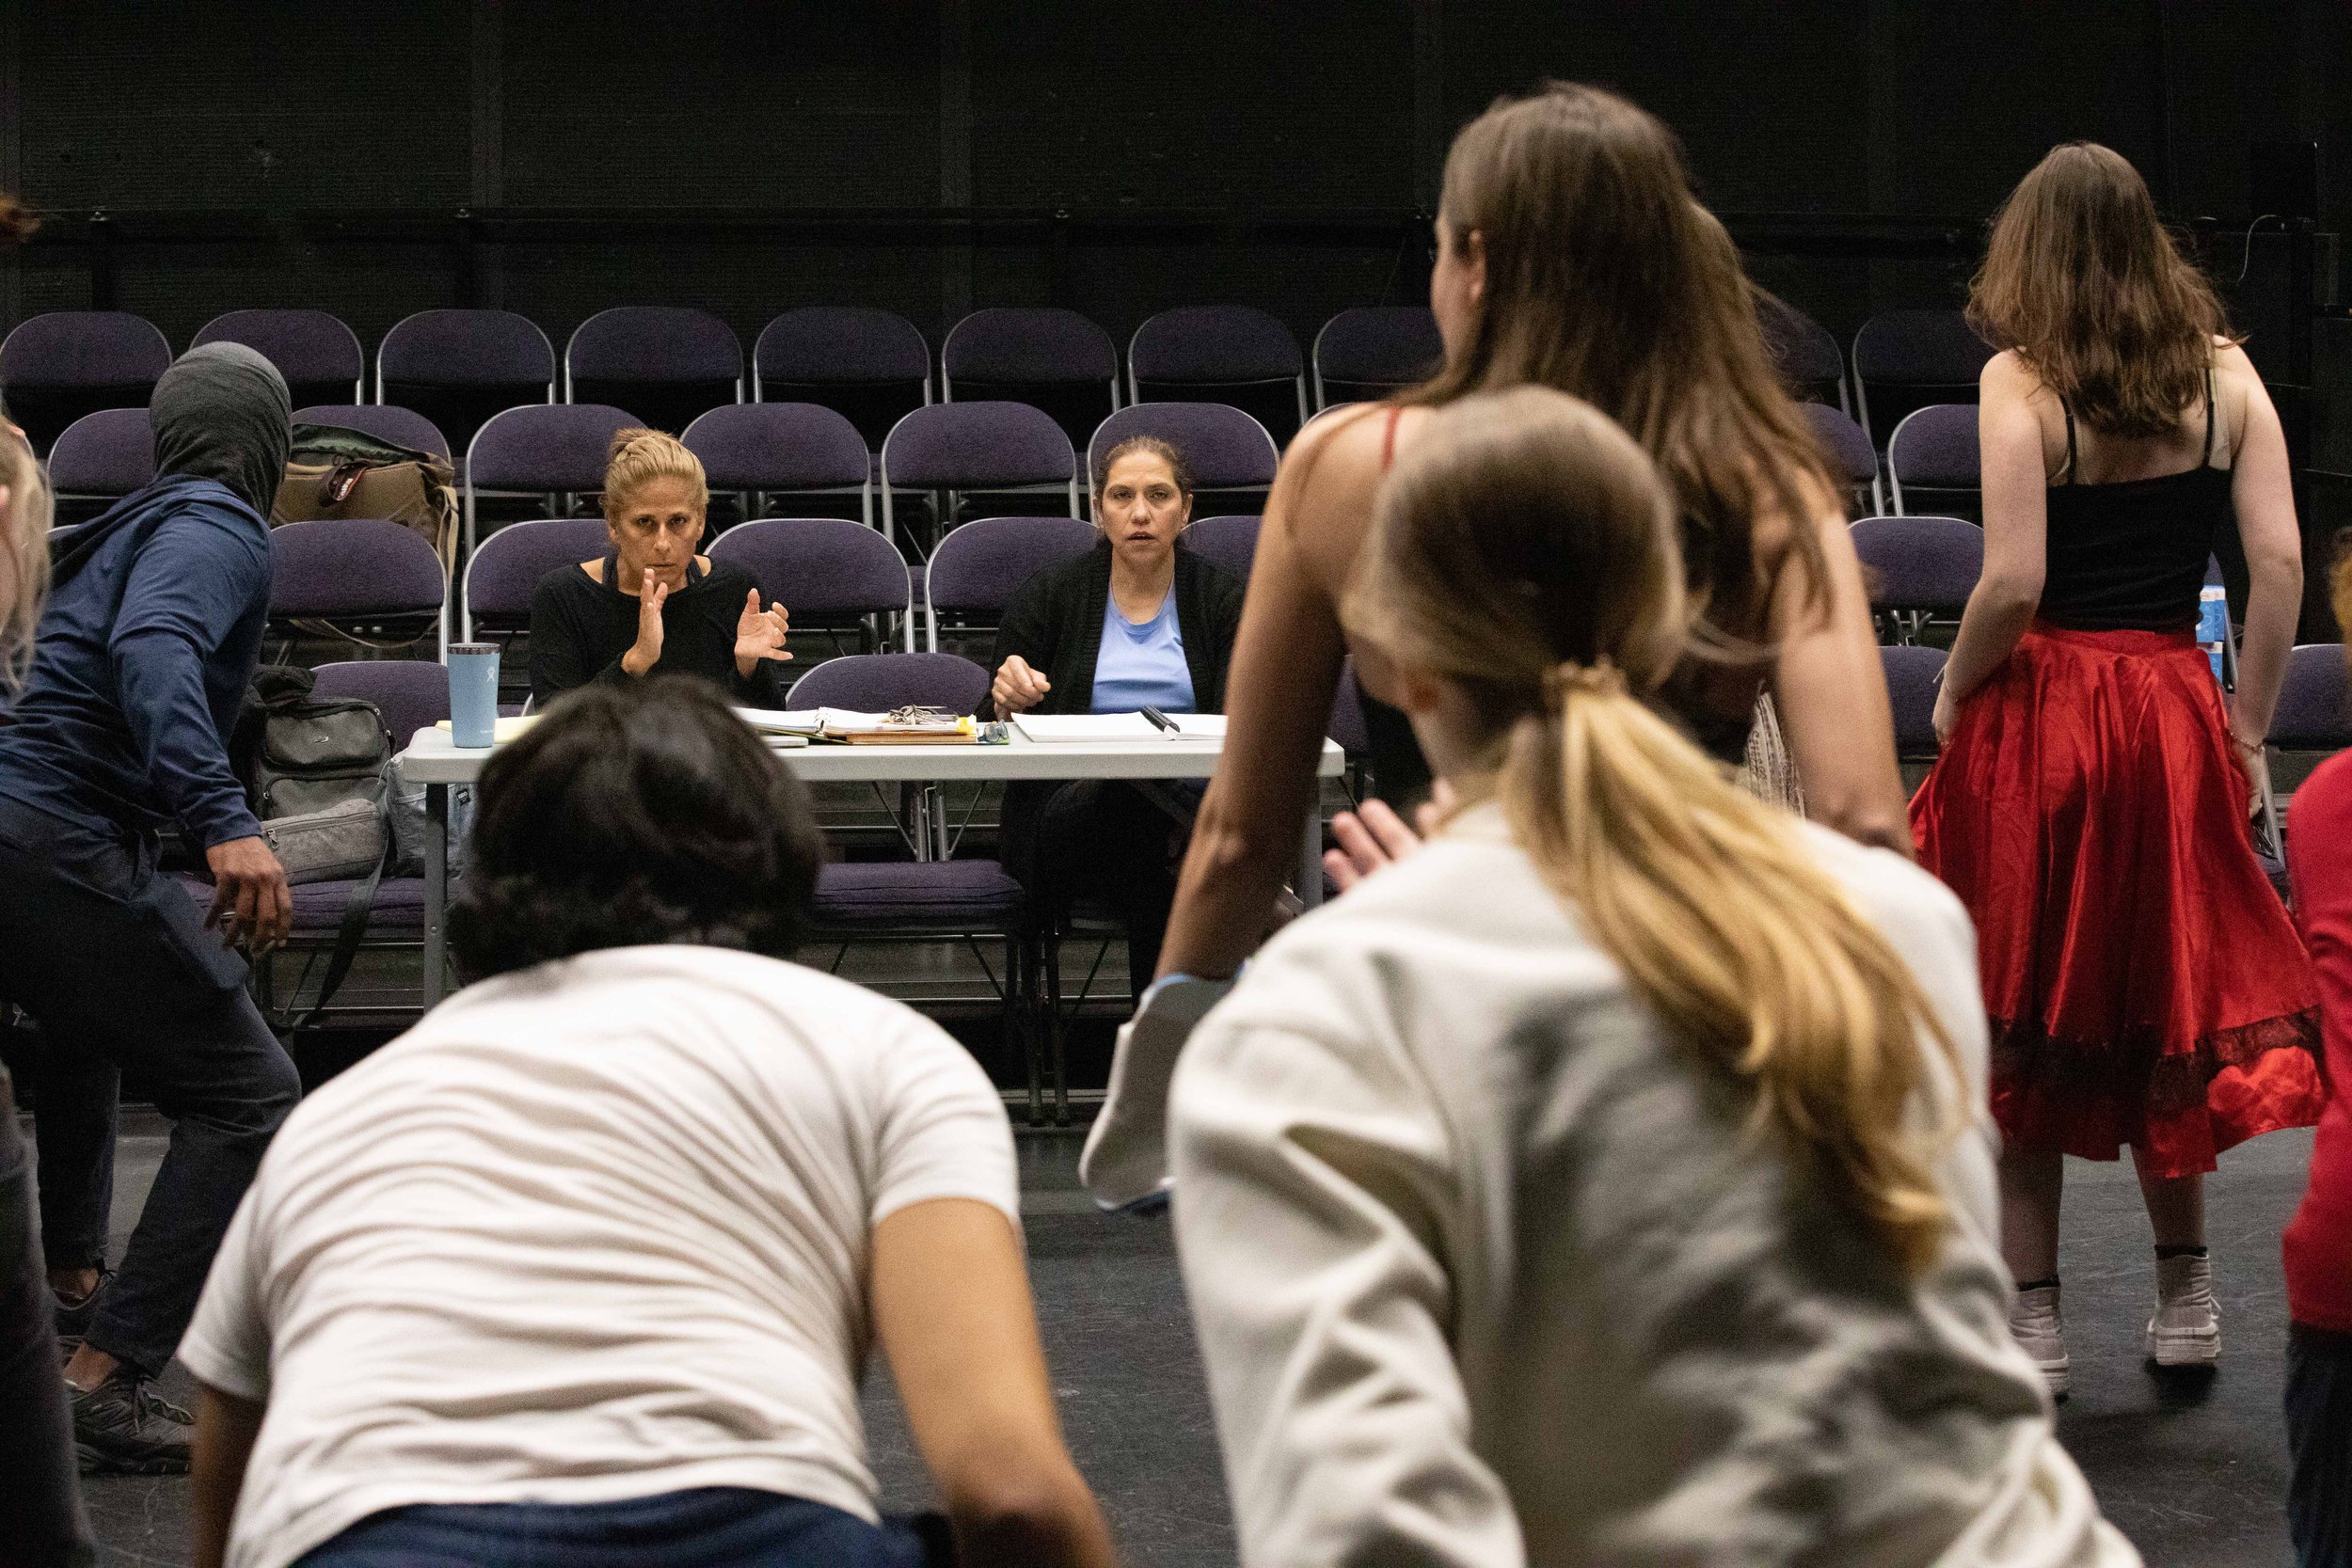  SMC Theater Instructors Perviz Sawoski (right) and Choreographer Cihtli Ocampo (left) at a class rehearsal for the musical “Hunchback of Notredame”. Theater Arts building at SMC main campus, Santa Monica, Calif. March Tuesday 7, 2023. (Jorge Devotto